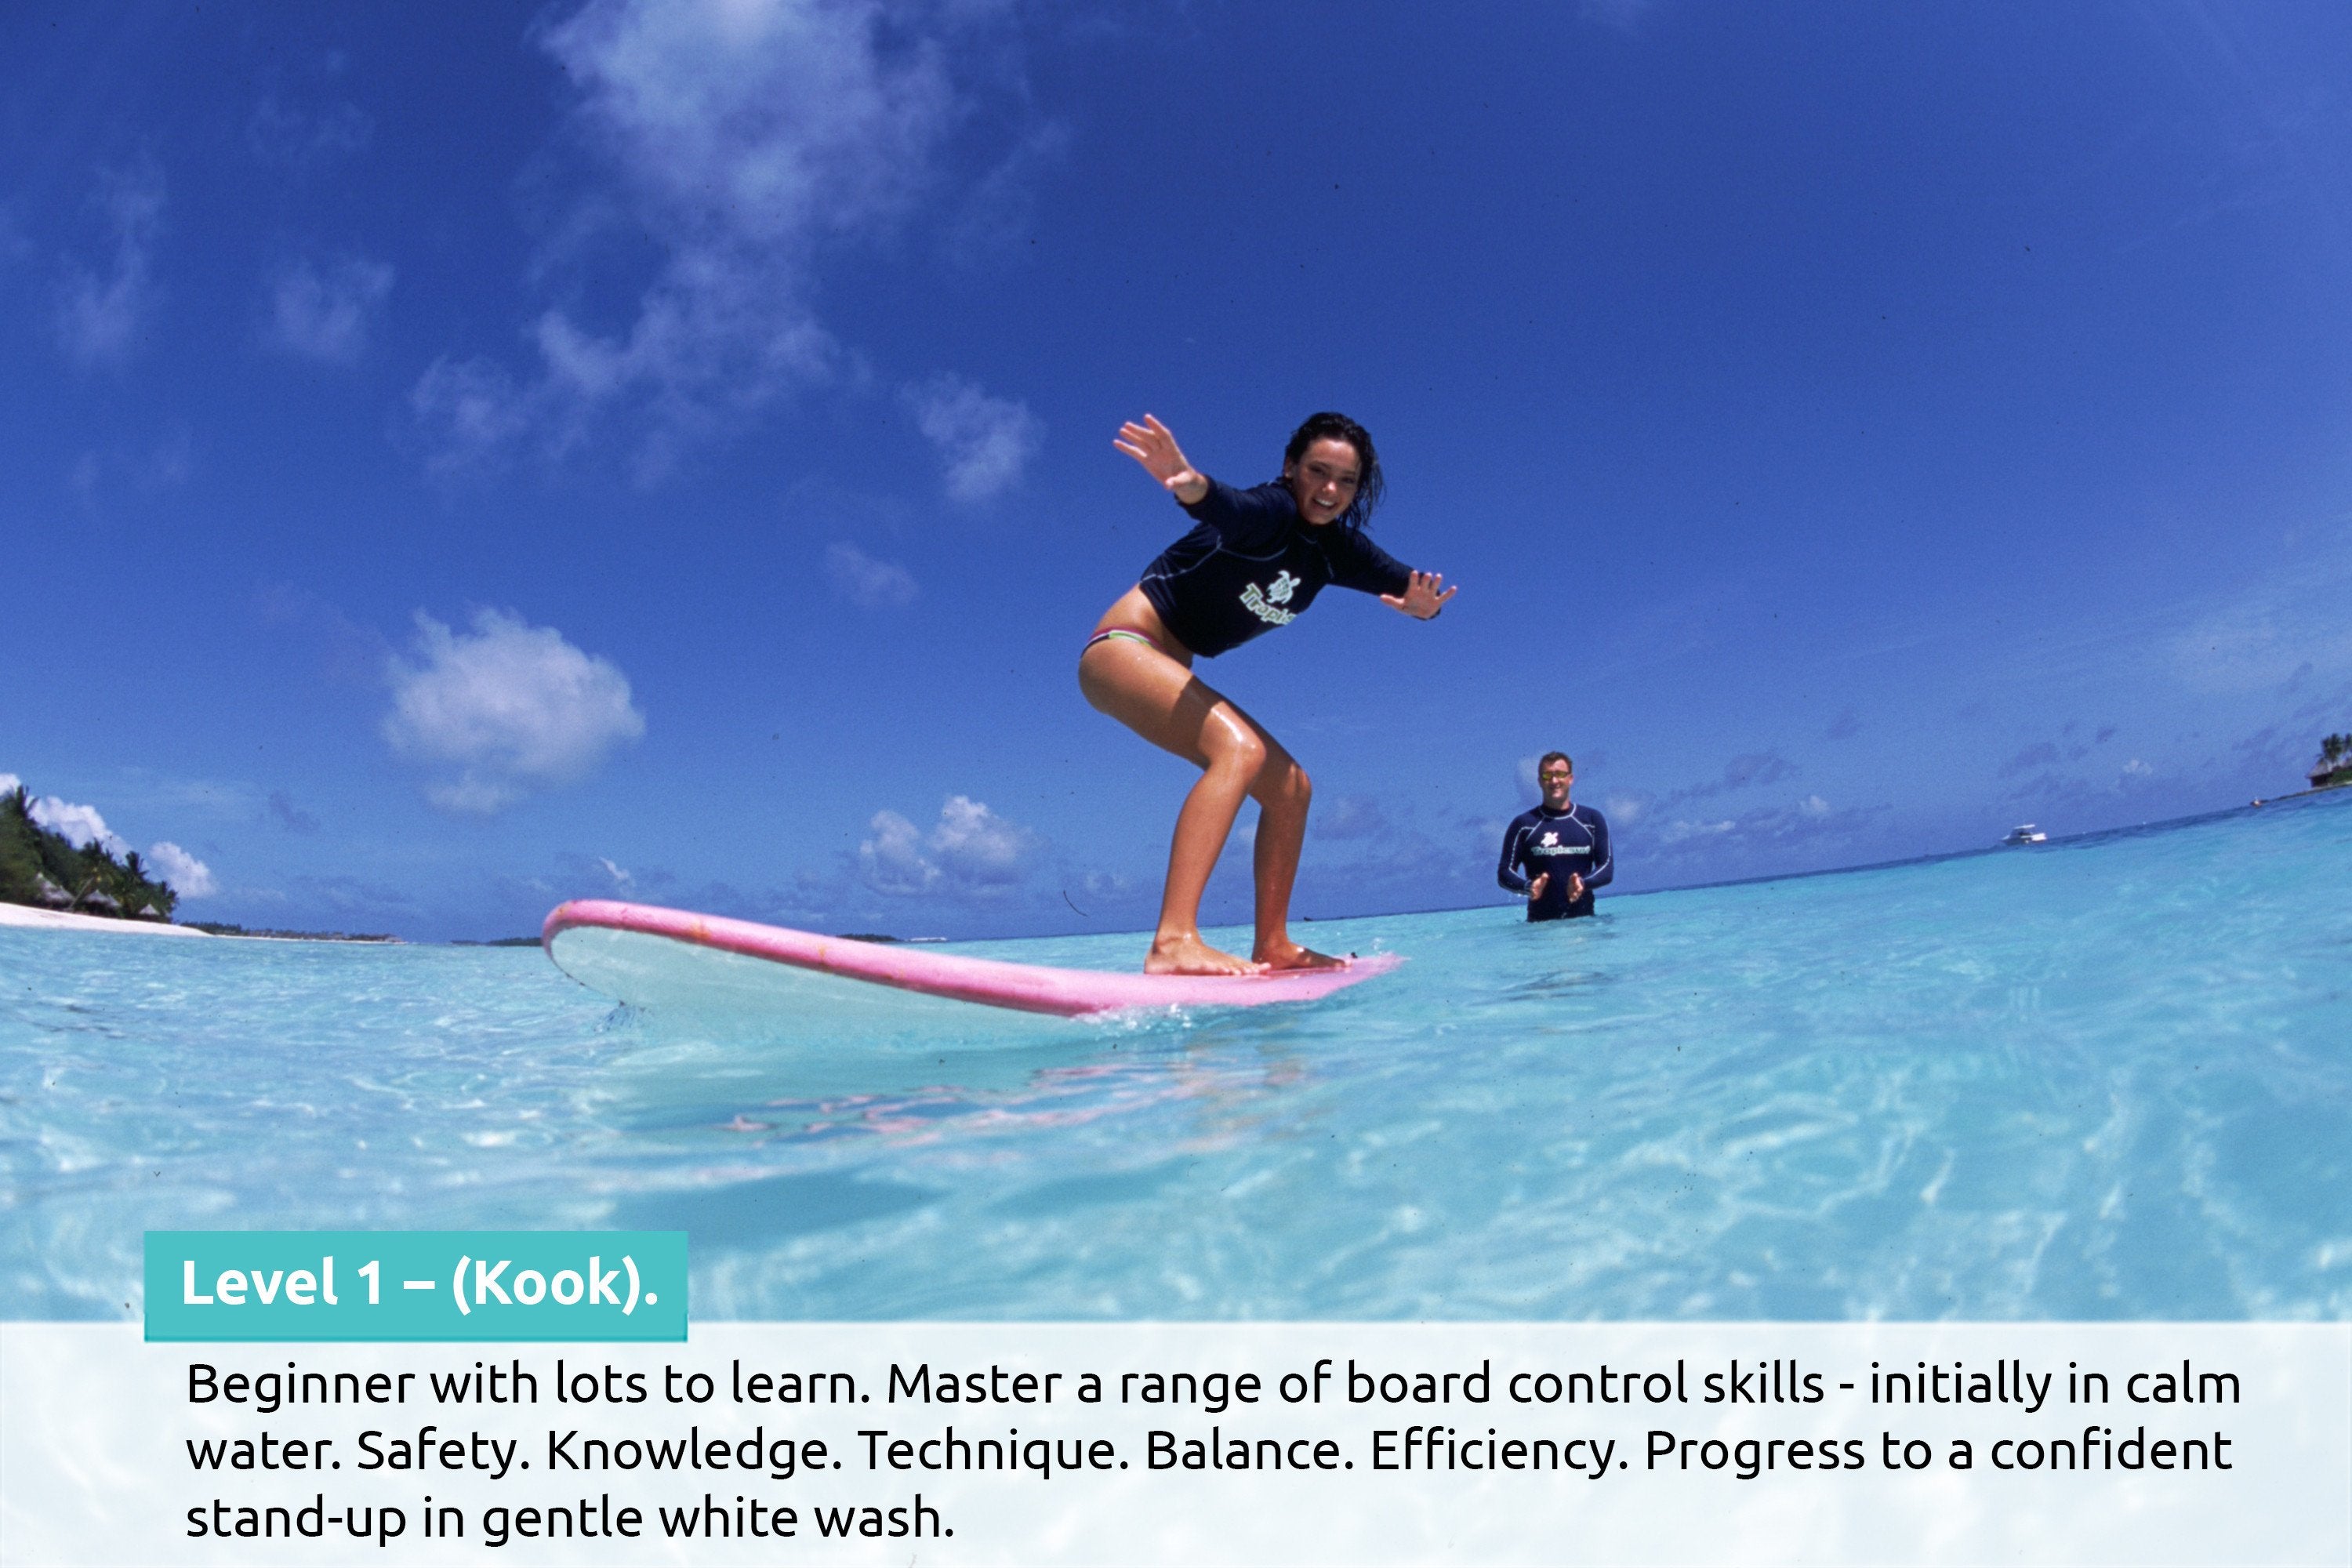 Kook, Learn How to Surf Better